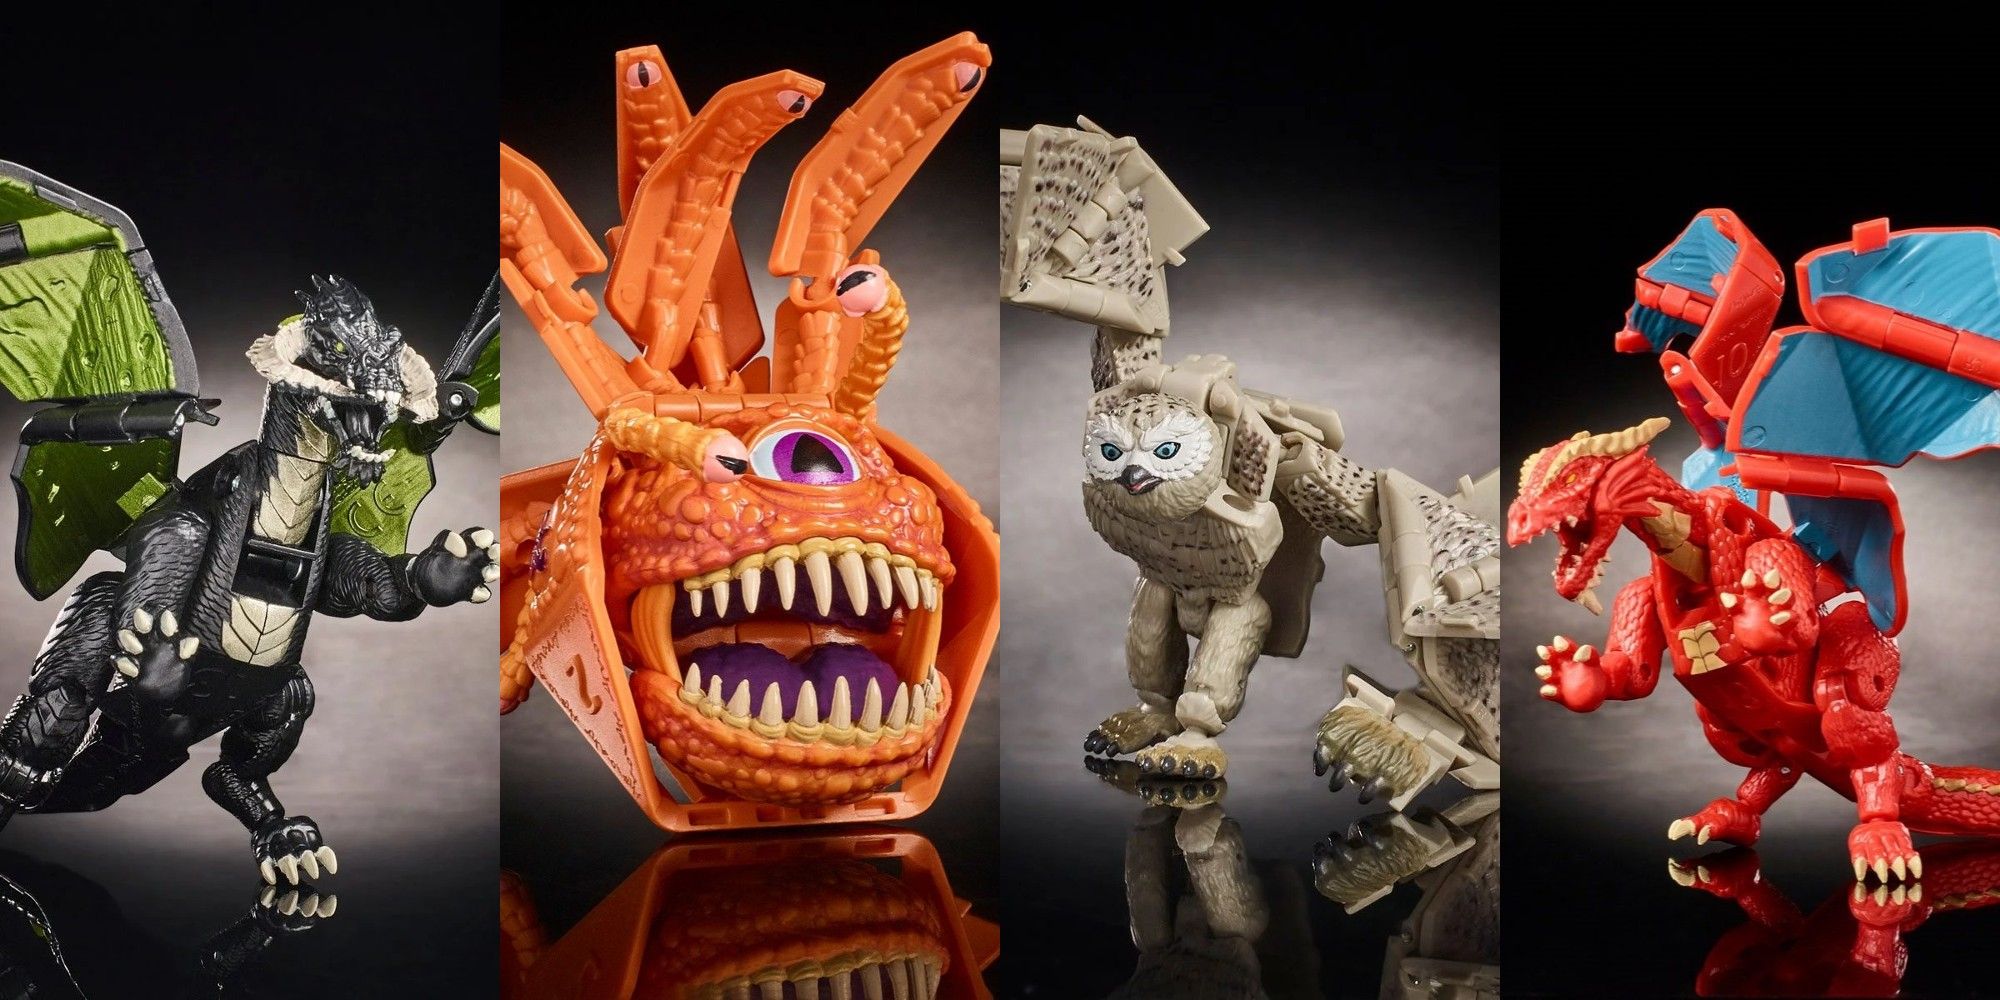 D&D Monsters Turn Into Giant Dice With These Transformer-Inspired Toys